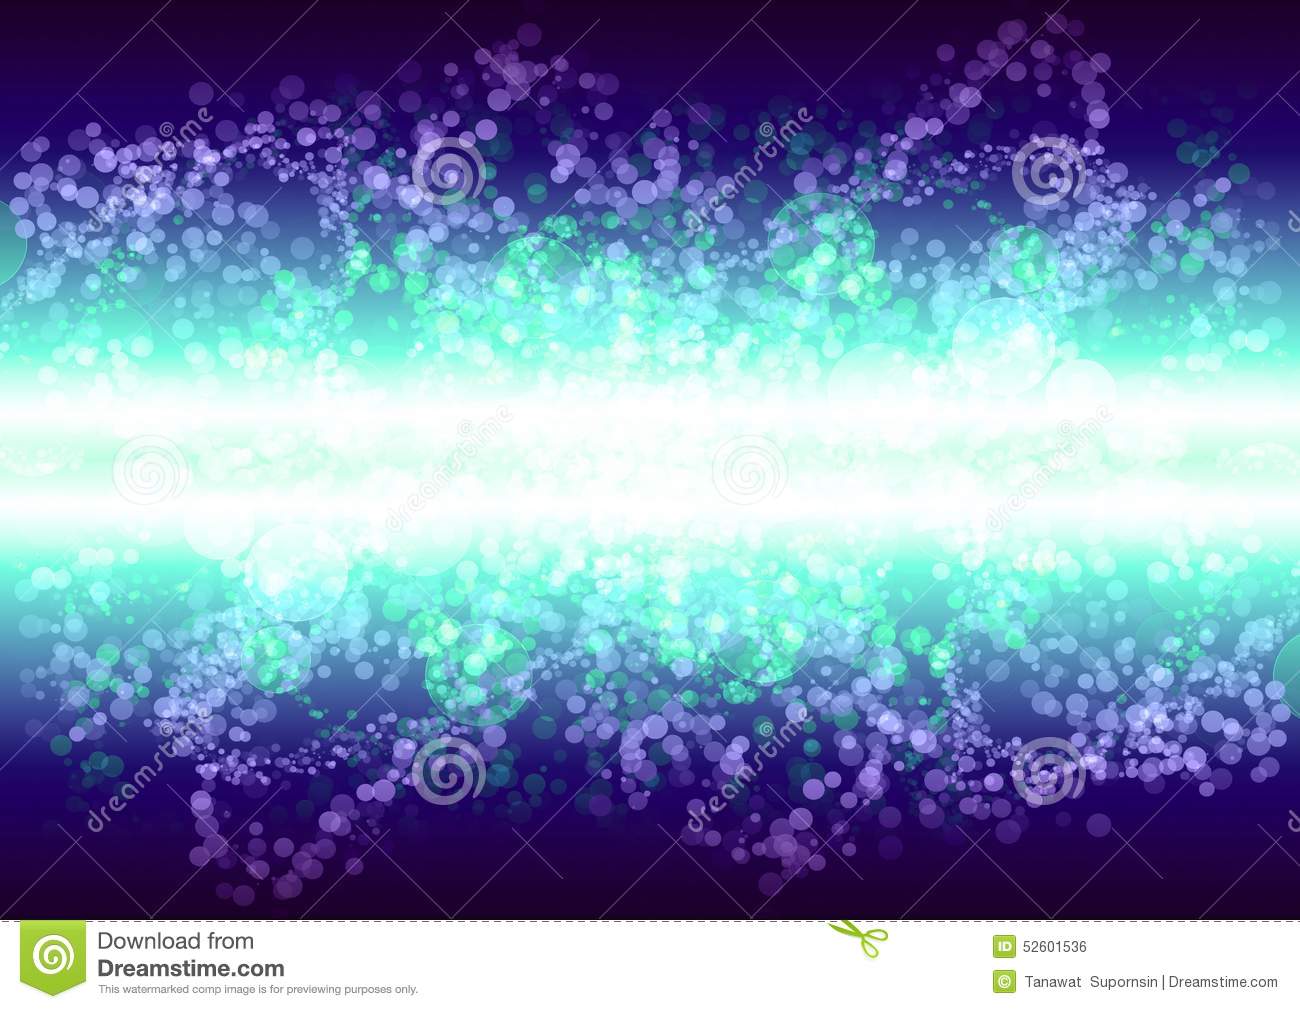 Green and purple wallpaper